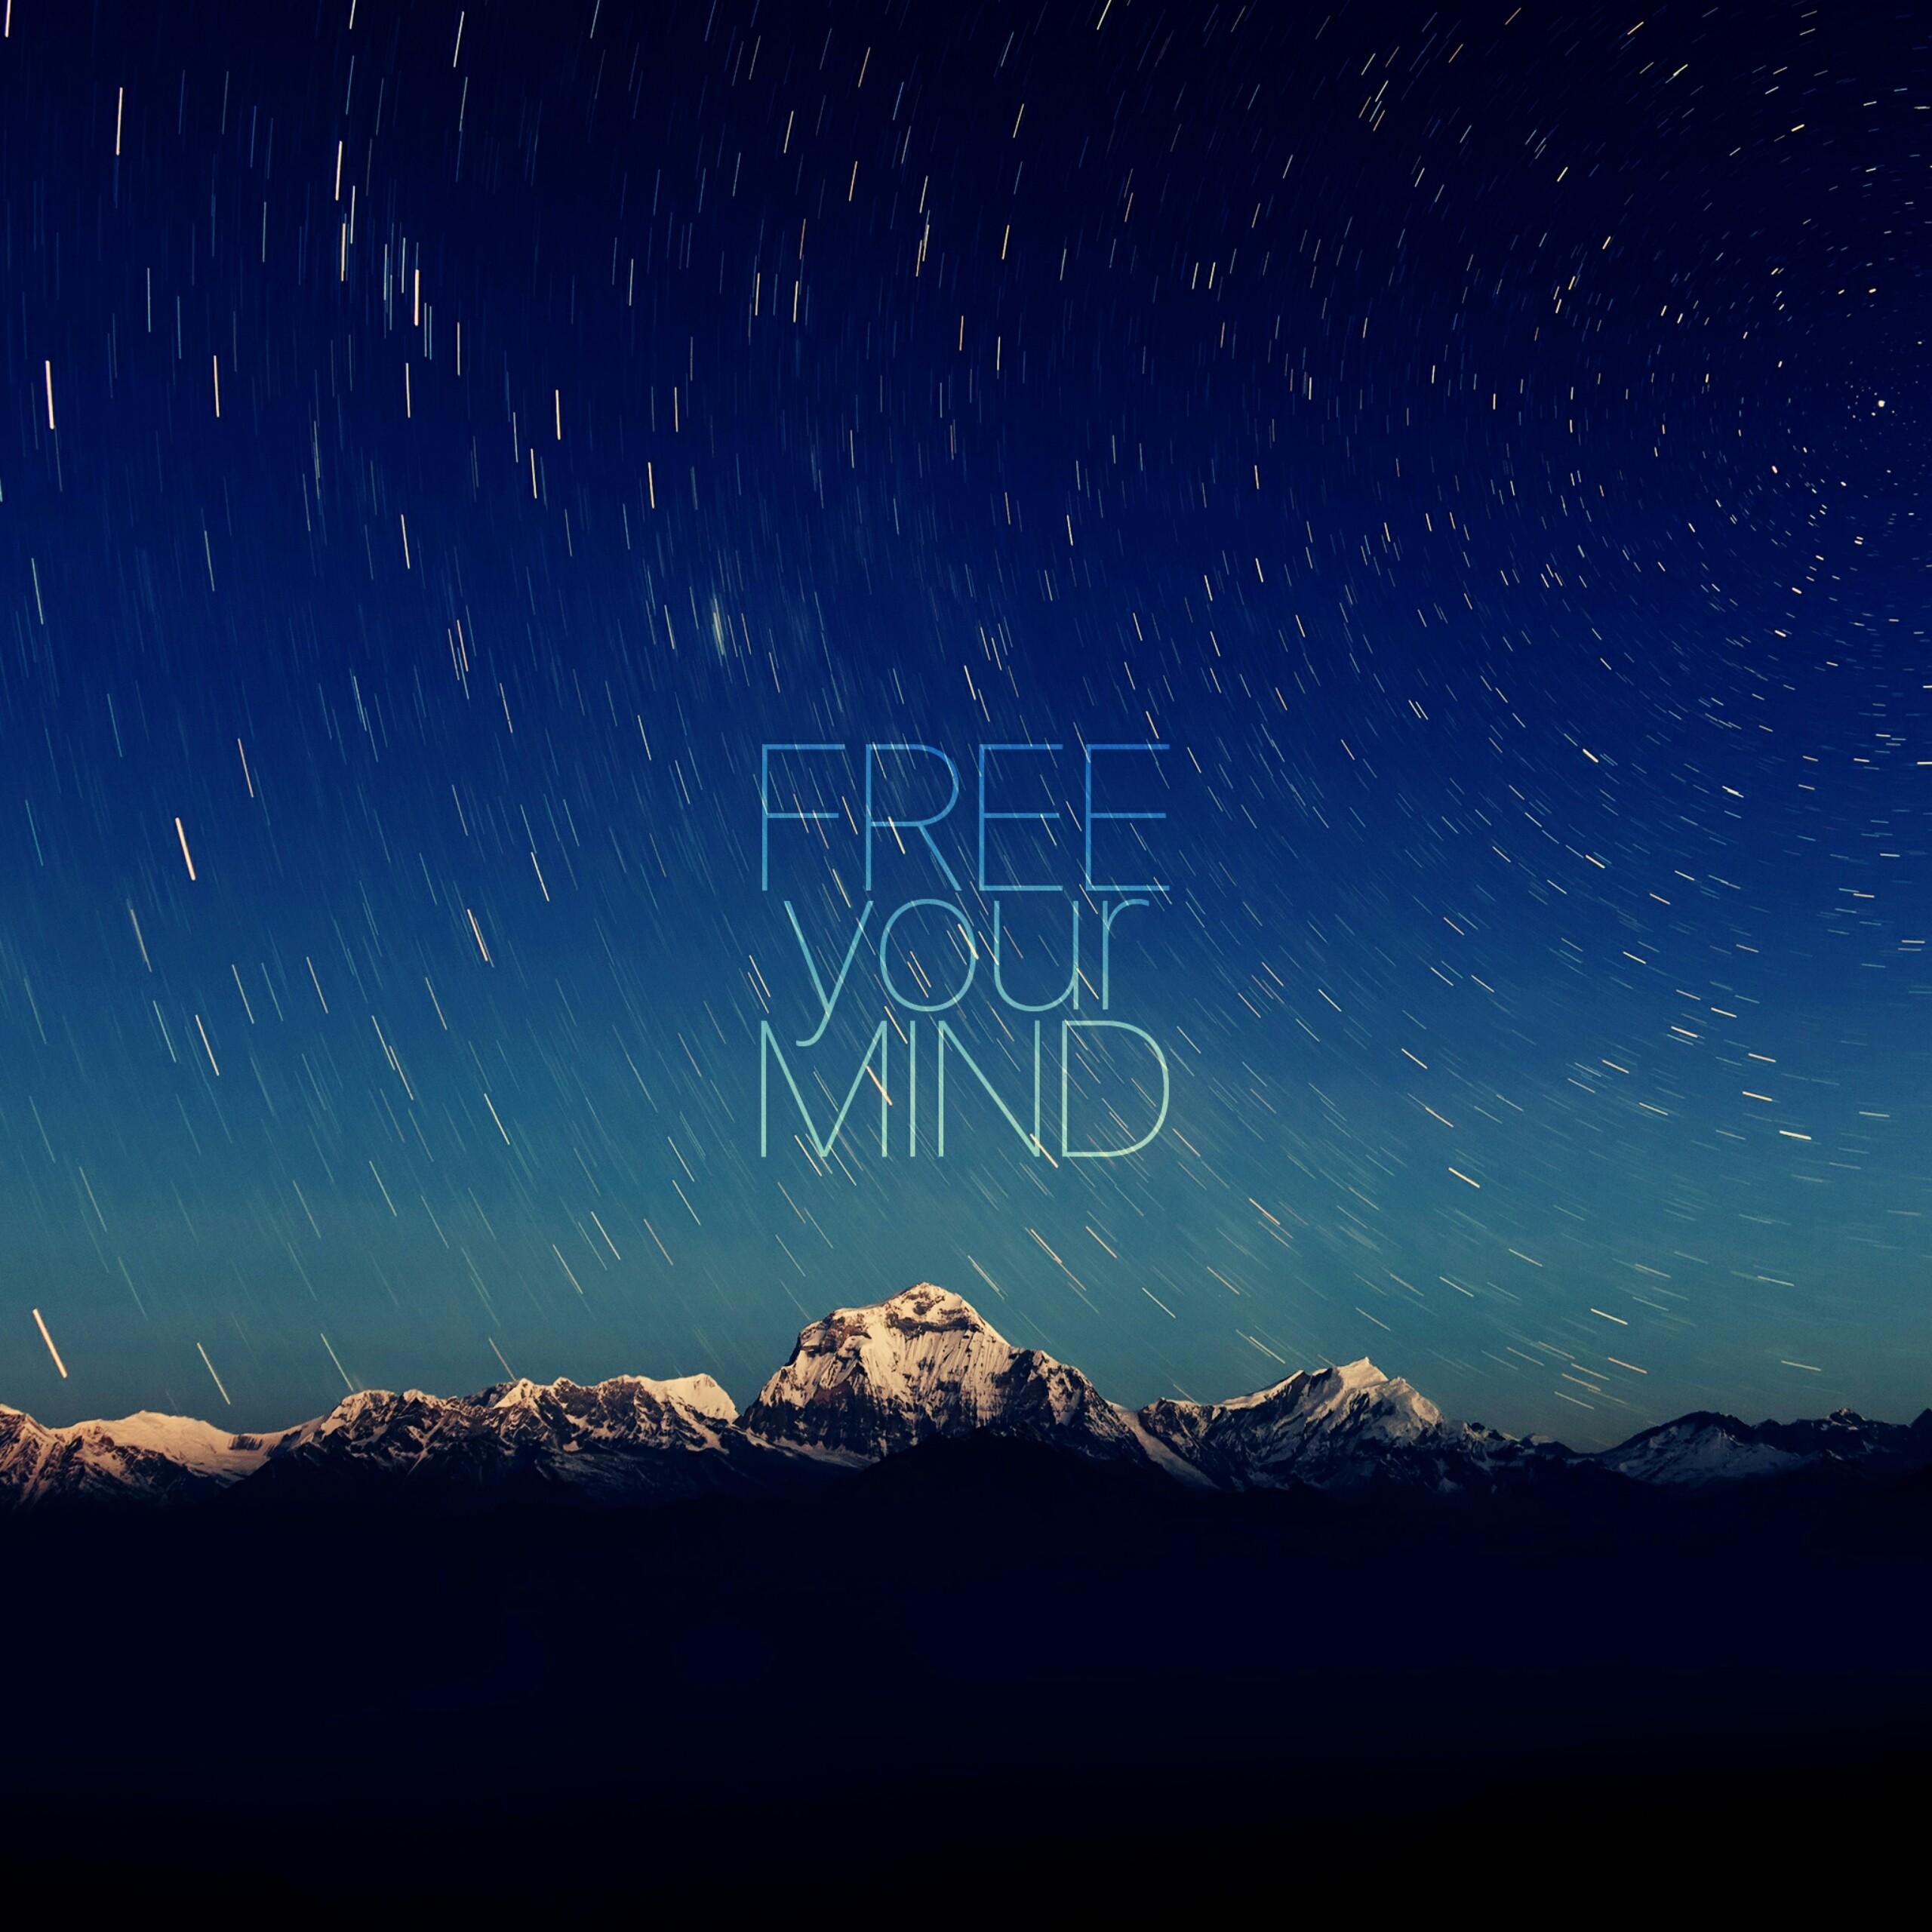 Free Your Mind Quotes QHD Wallpaper